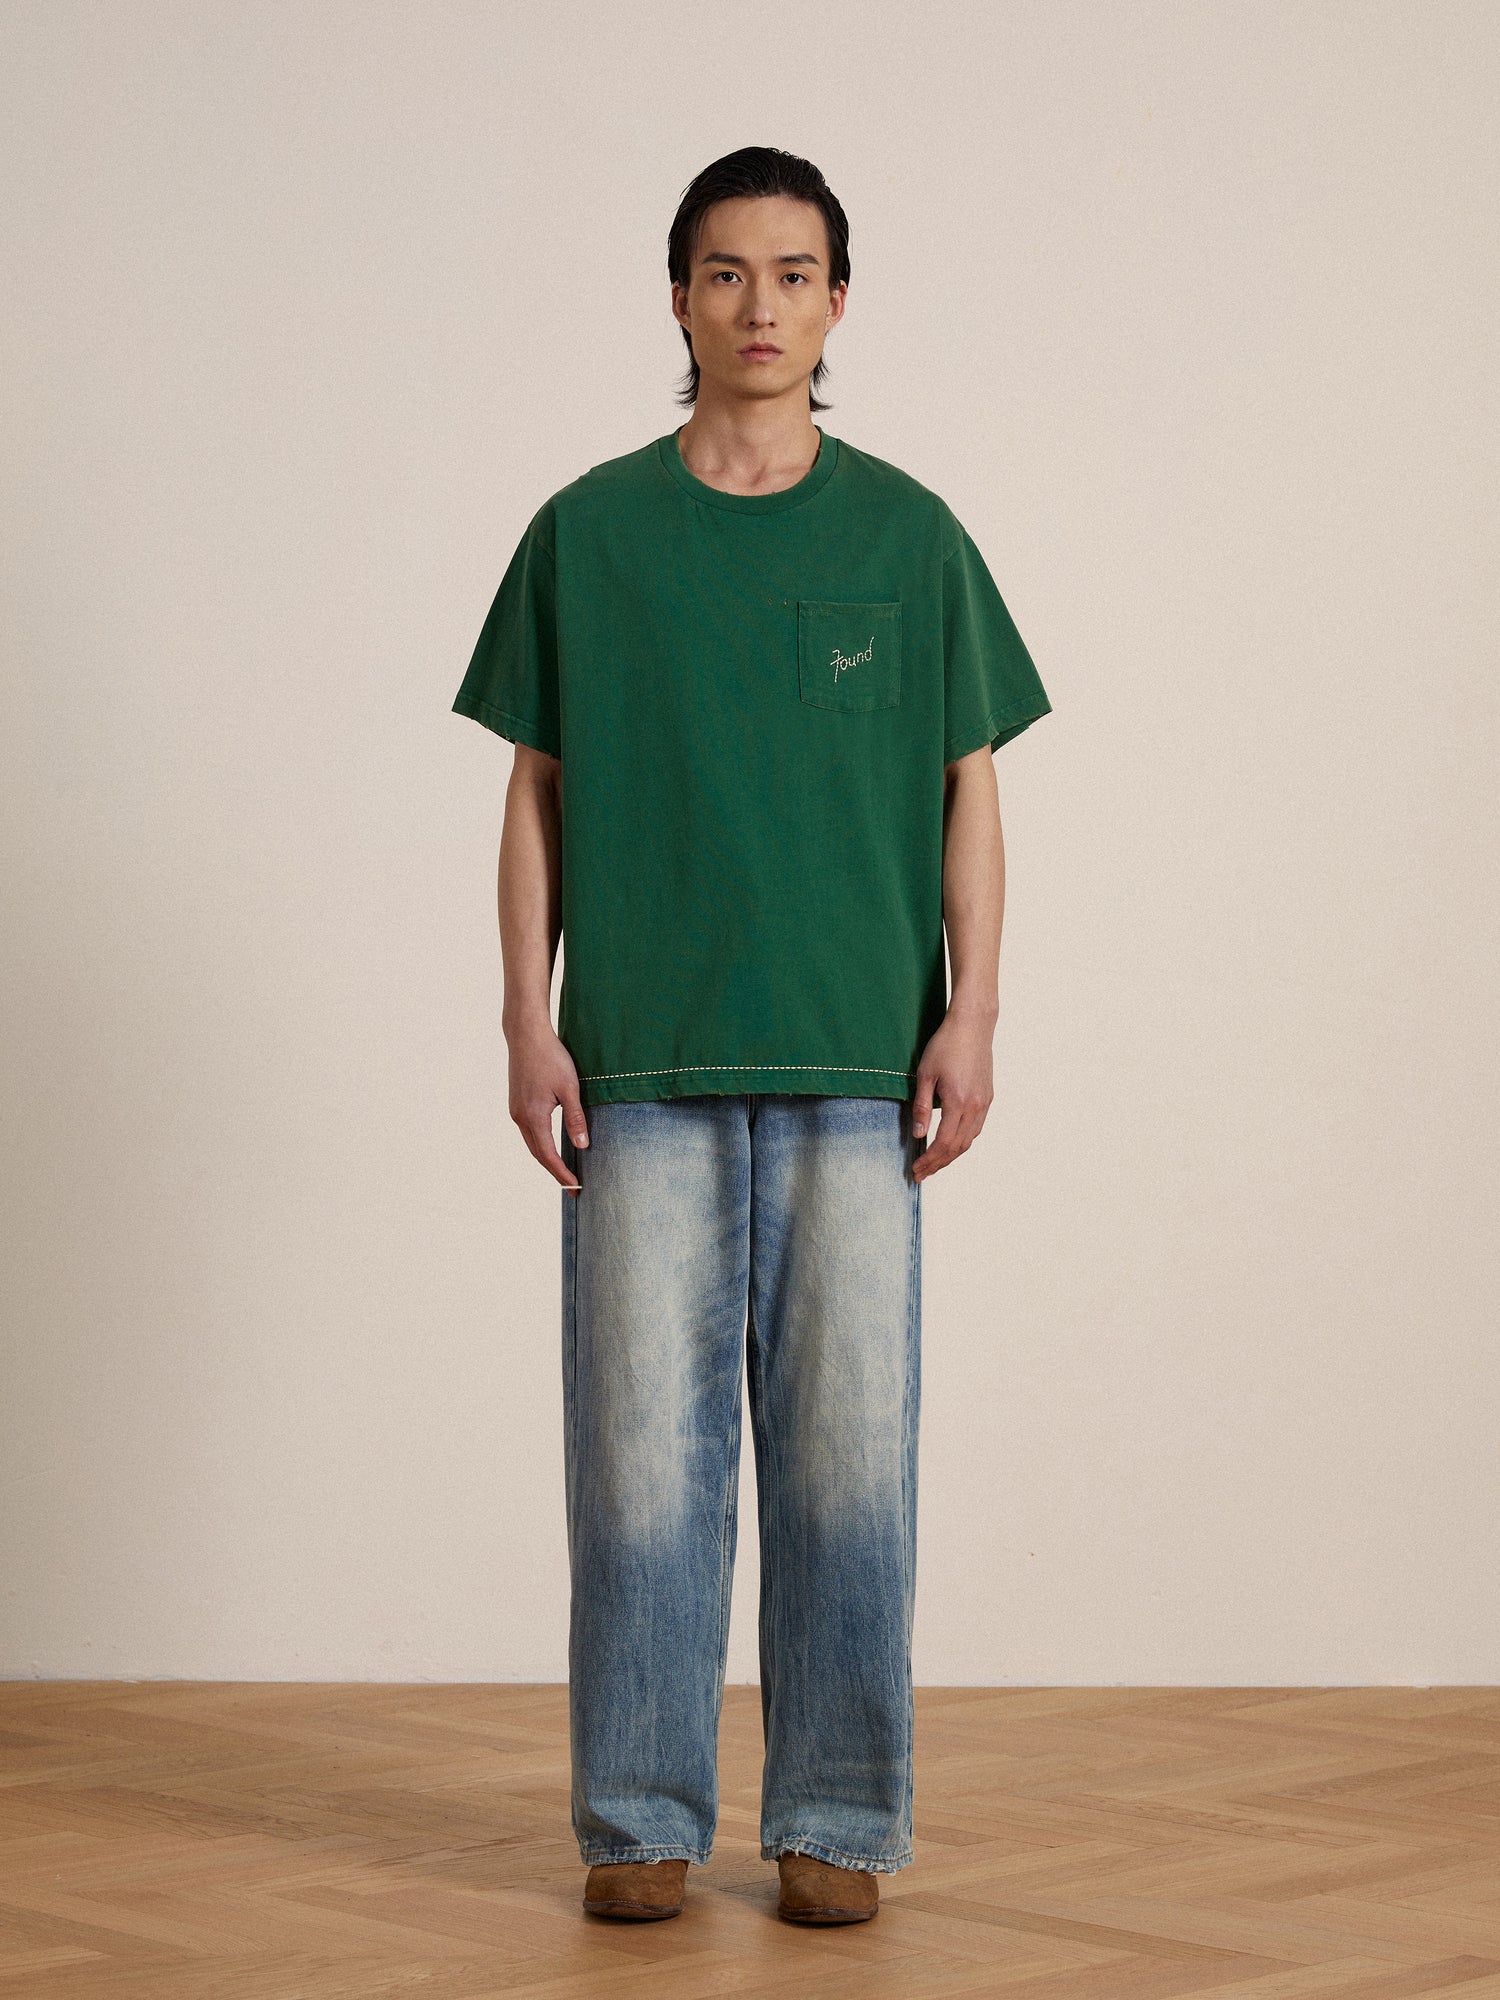 A man wearing a green Found Embroidered Logo Tee and jeans.